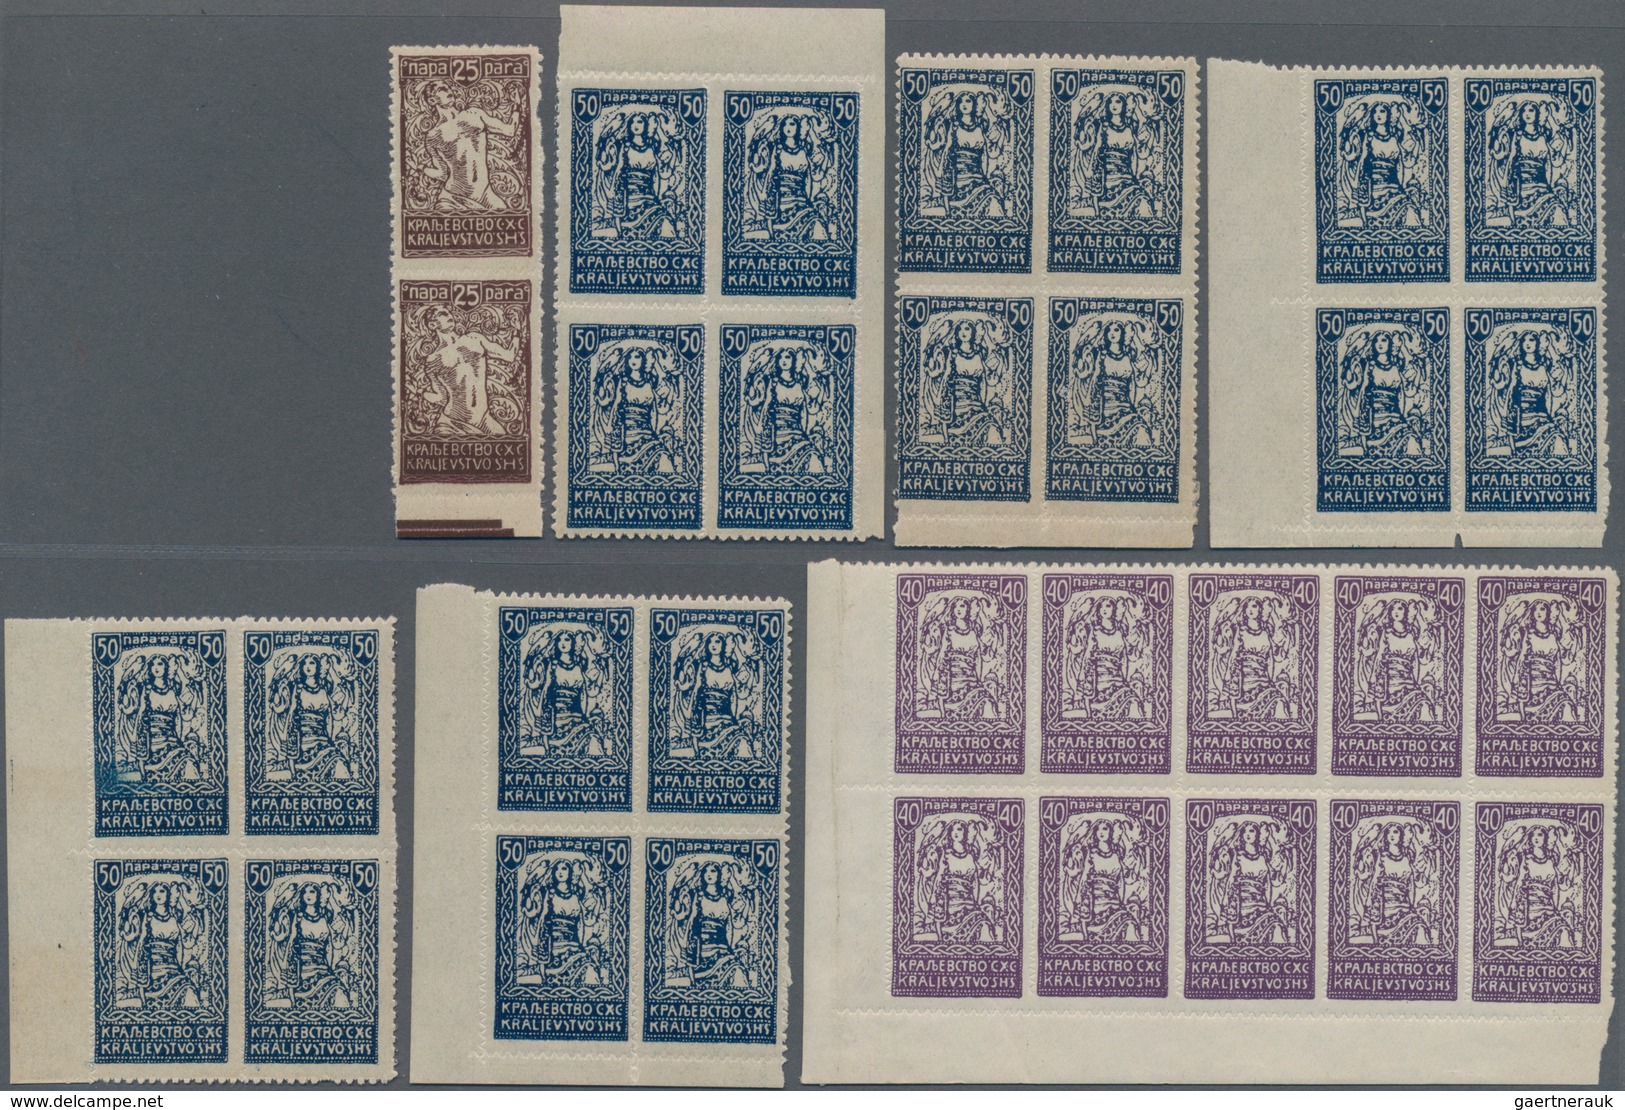 Jugoslawien: 1920. "Chanbreakers" Varieties. Four stock card with various degrees of OFFSETS of the